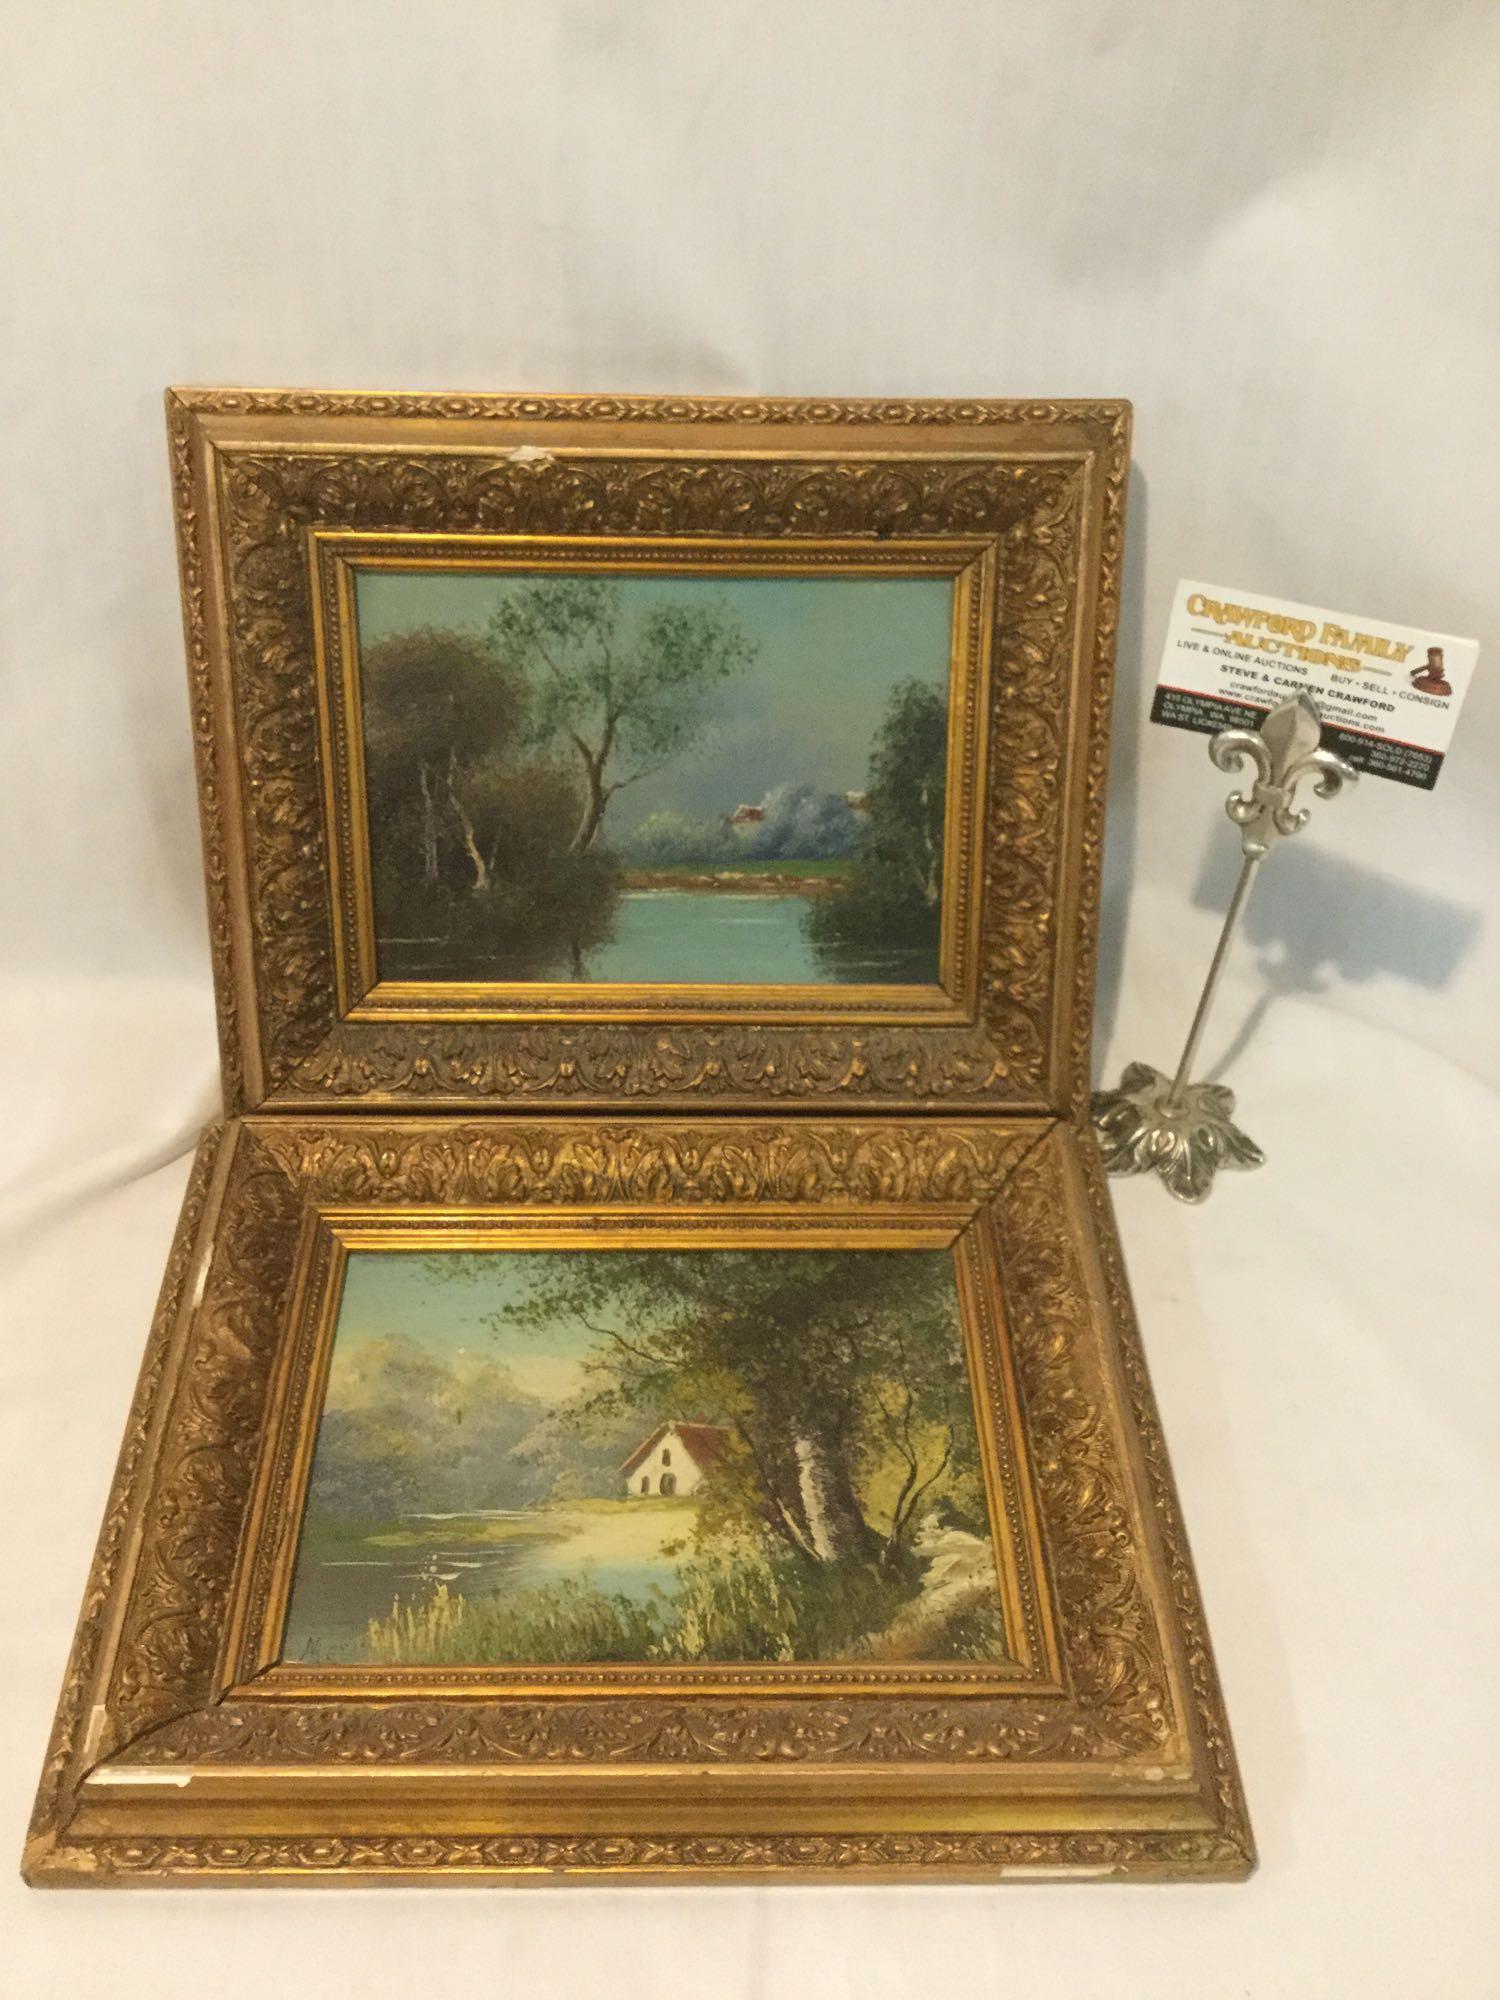 Pair of original nature scene paintings in matching vintage frames, one is signed by artist